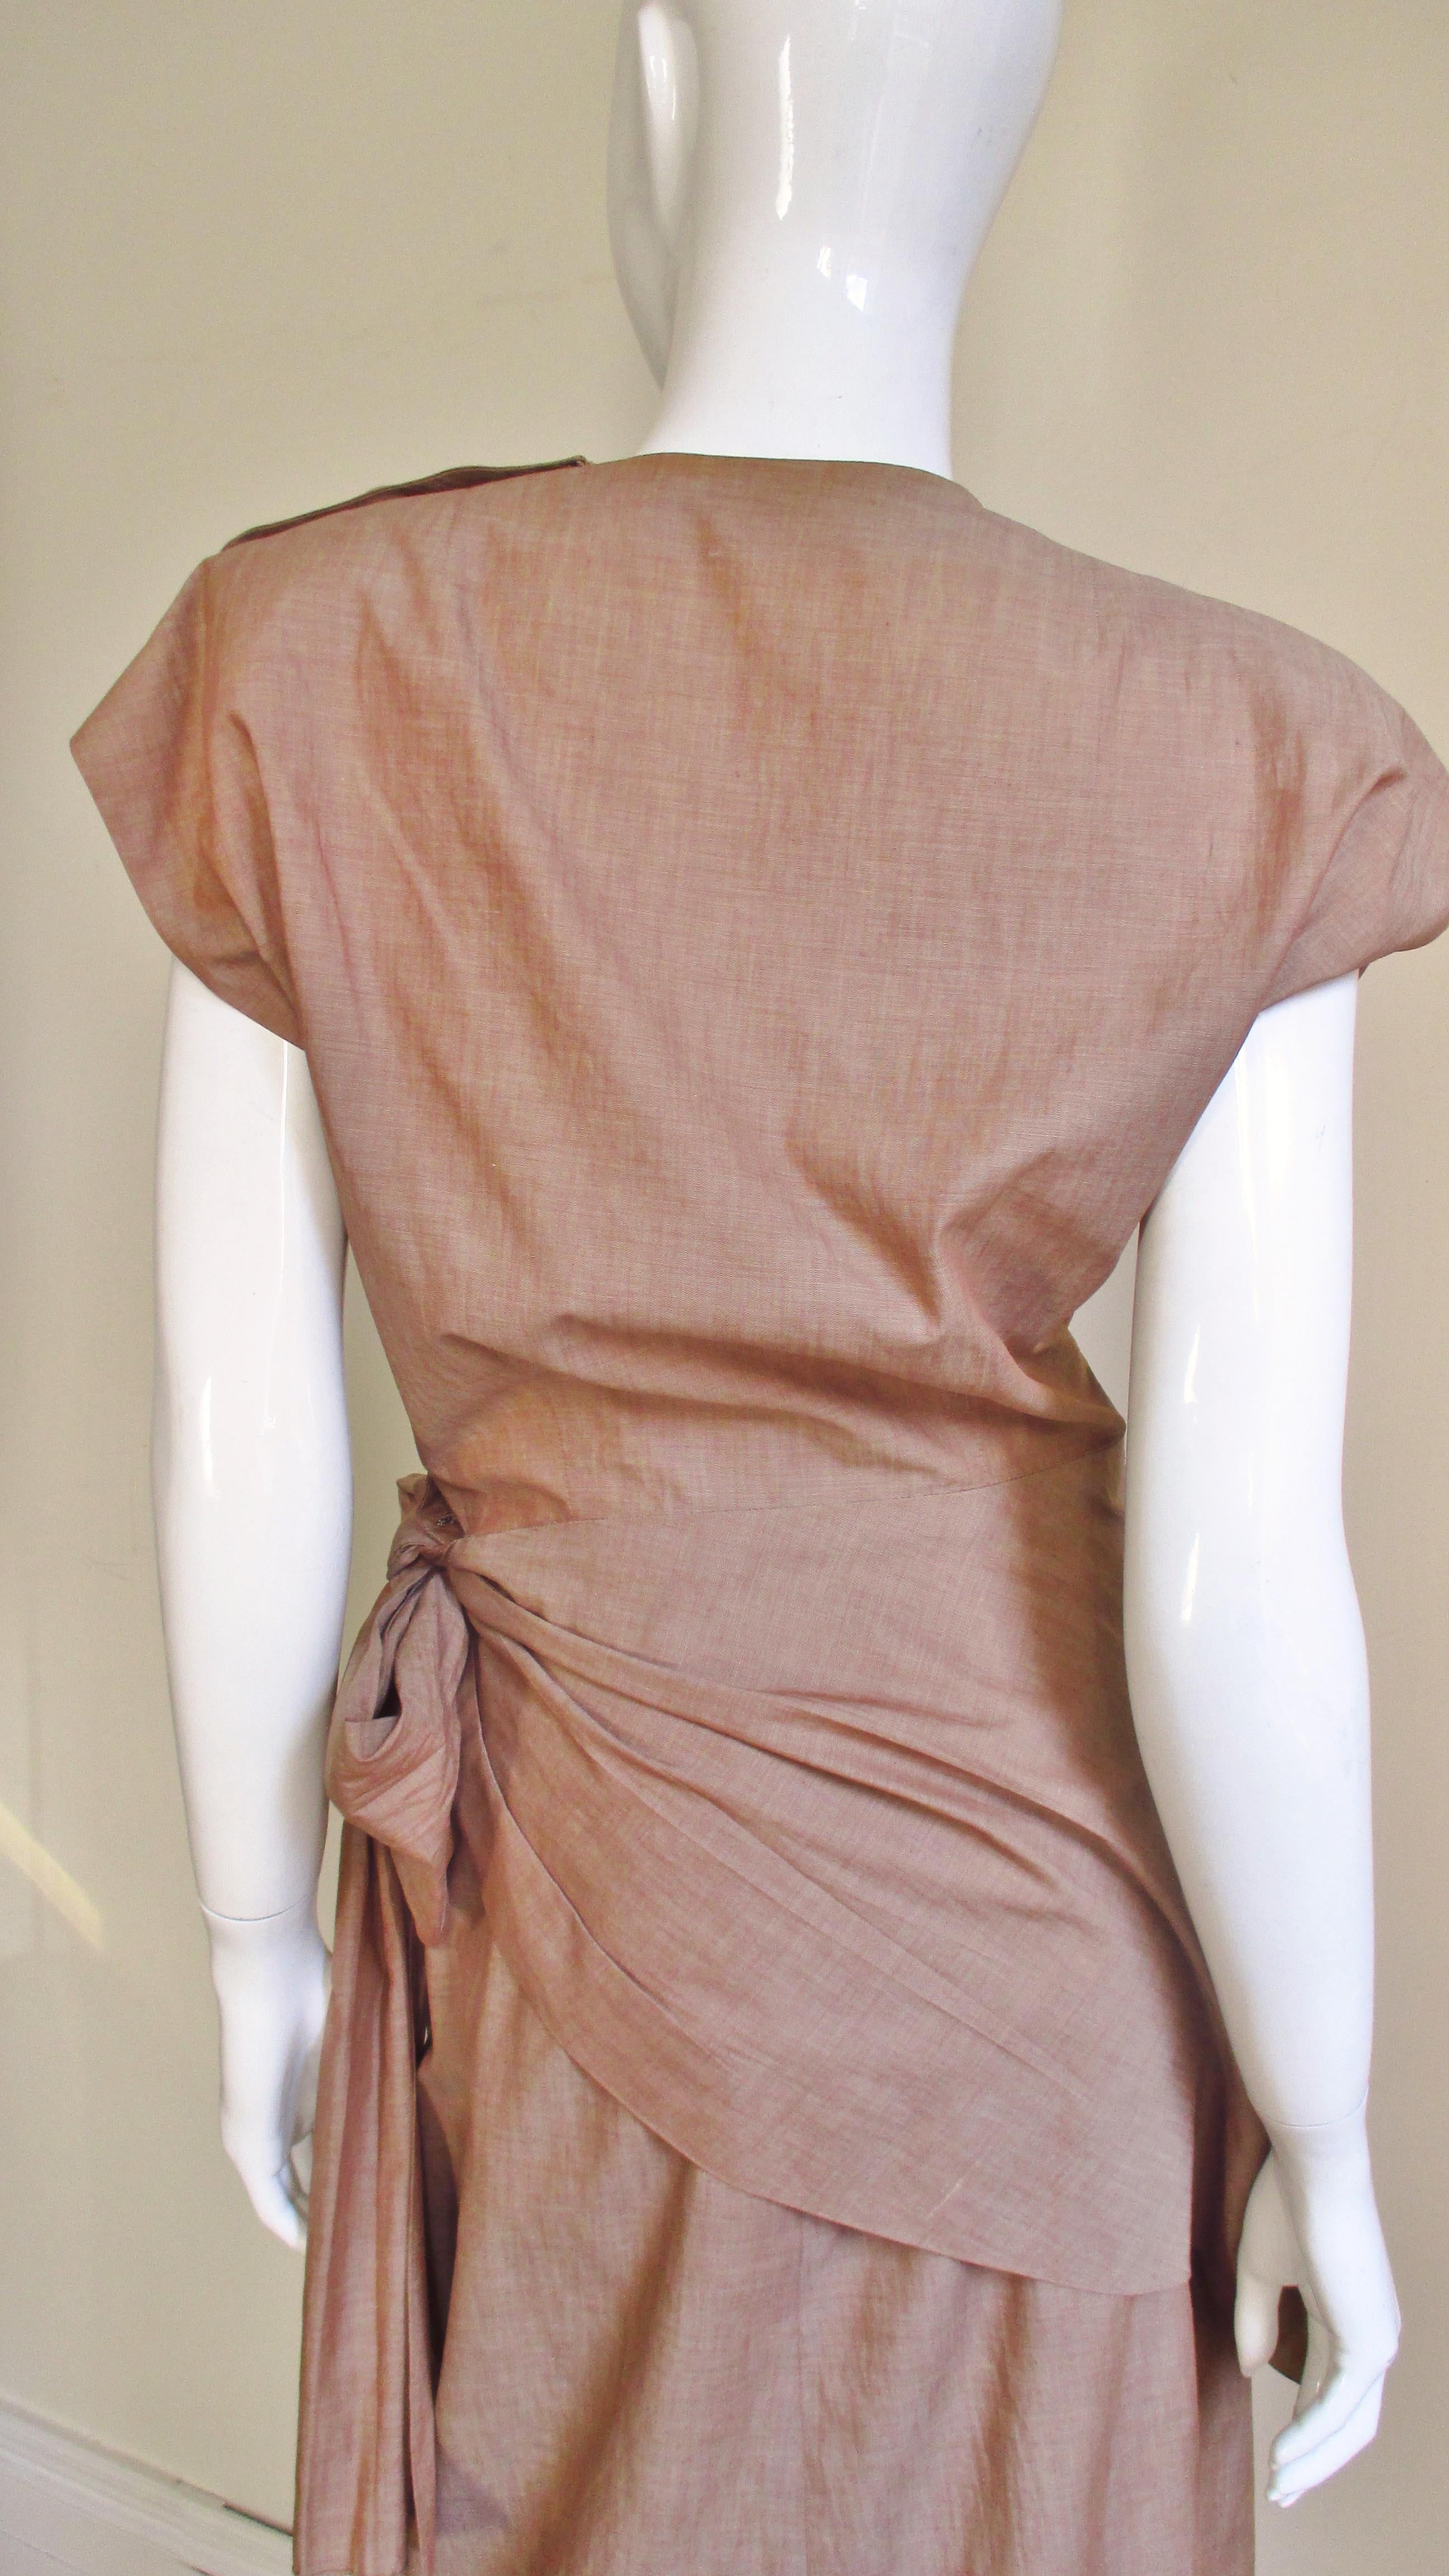  Adele Simpson 1940s Wrap Top and Skirt For Sale 5